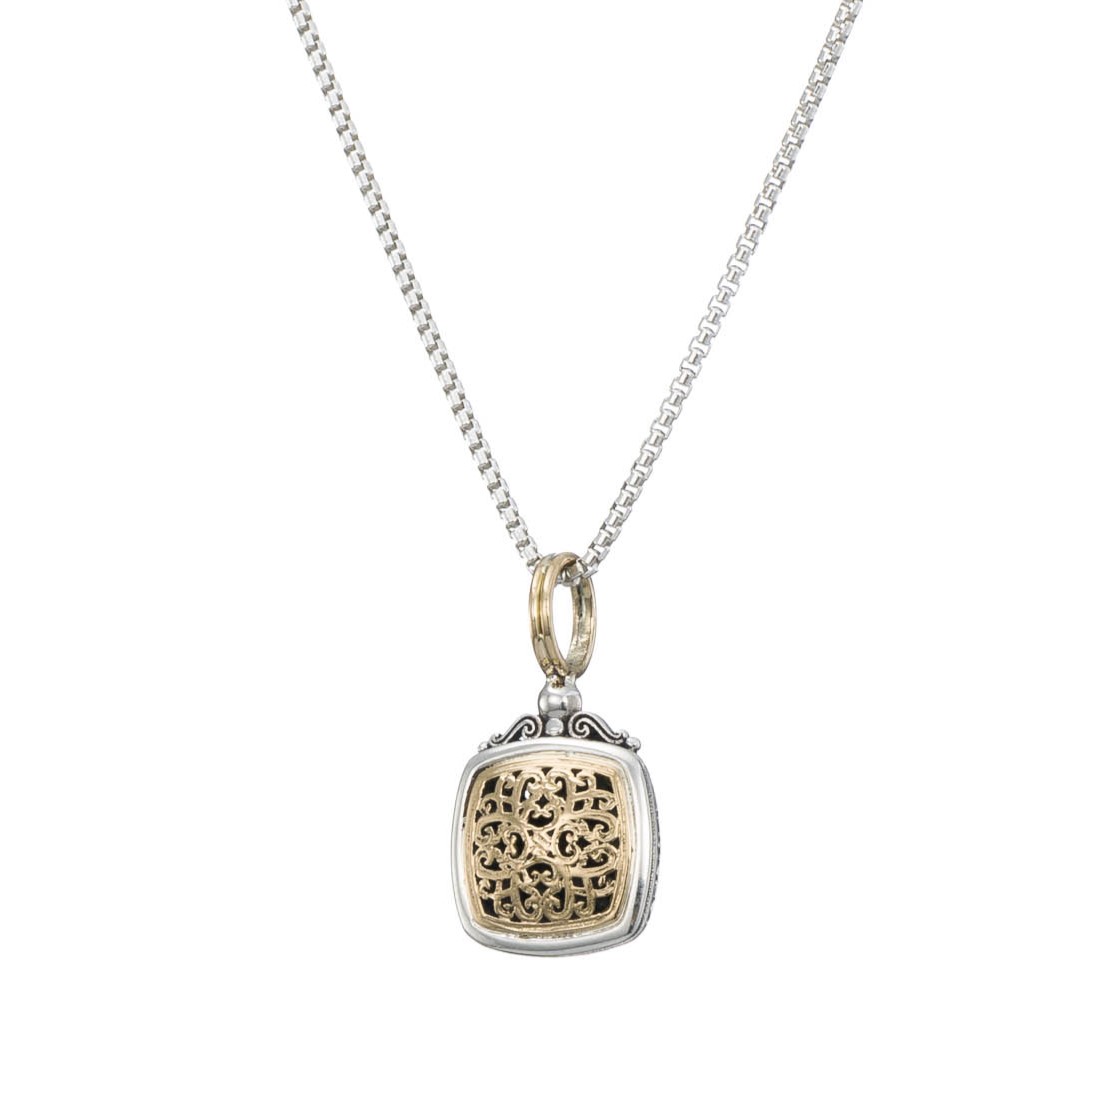 Mediterranean small square pendant in 18K Gold and Sterling Silver